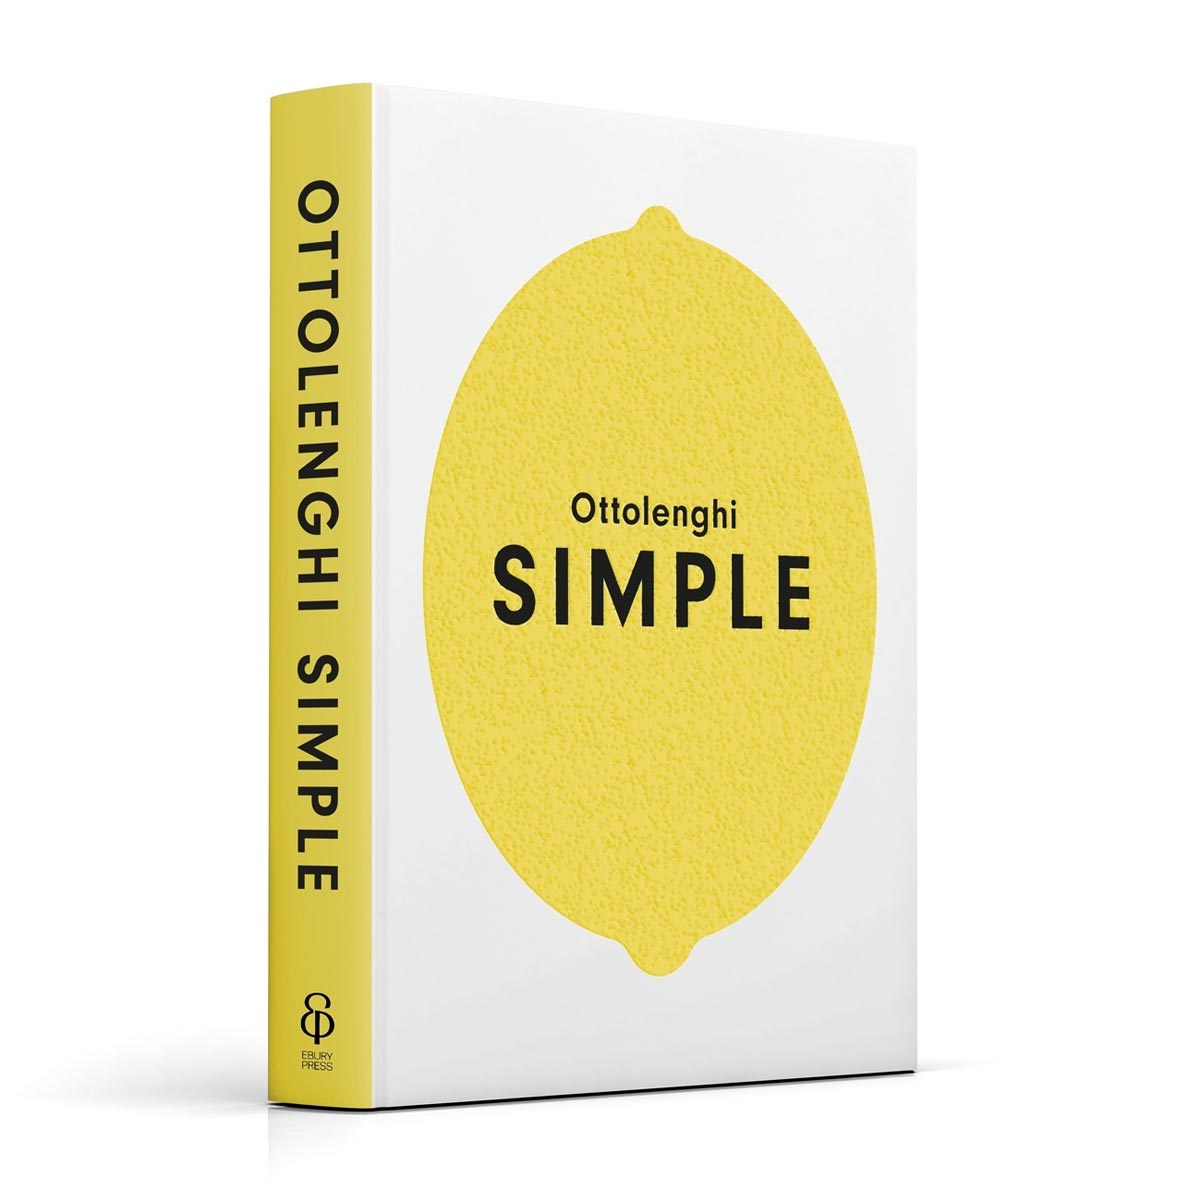 Ottolenghi Simple – MARCH